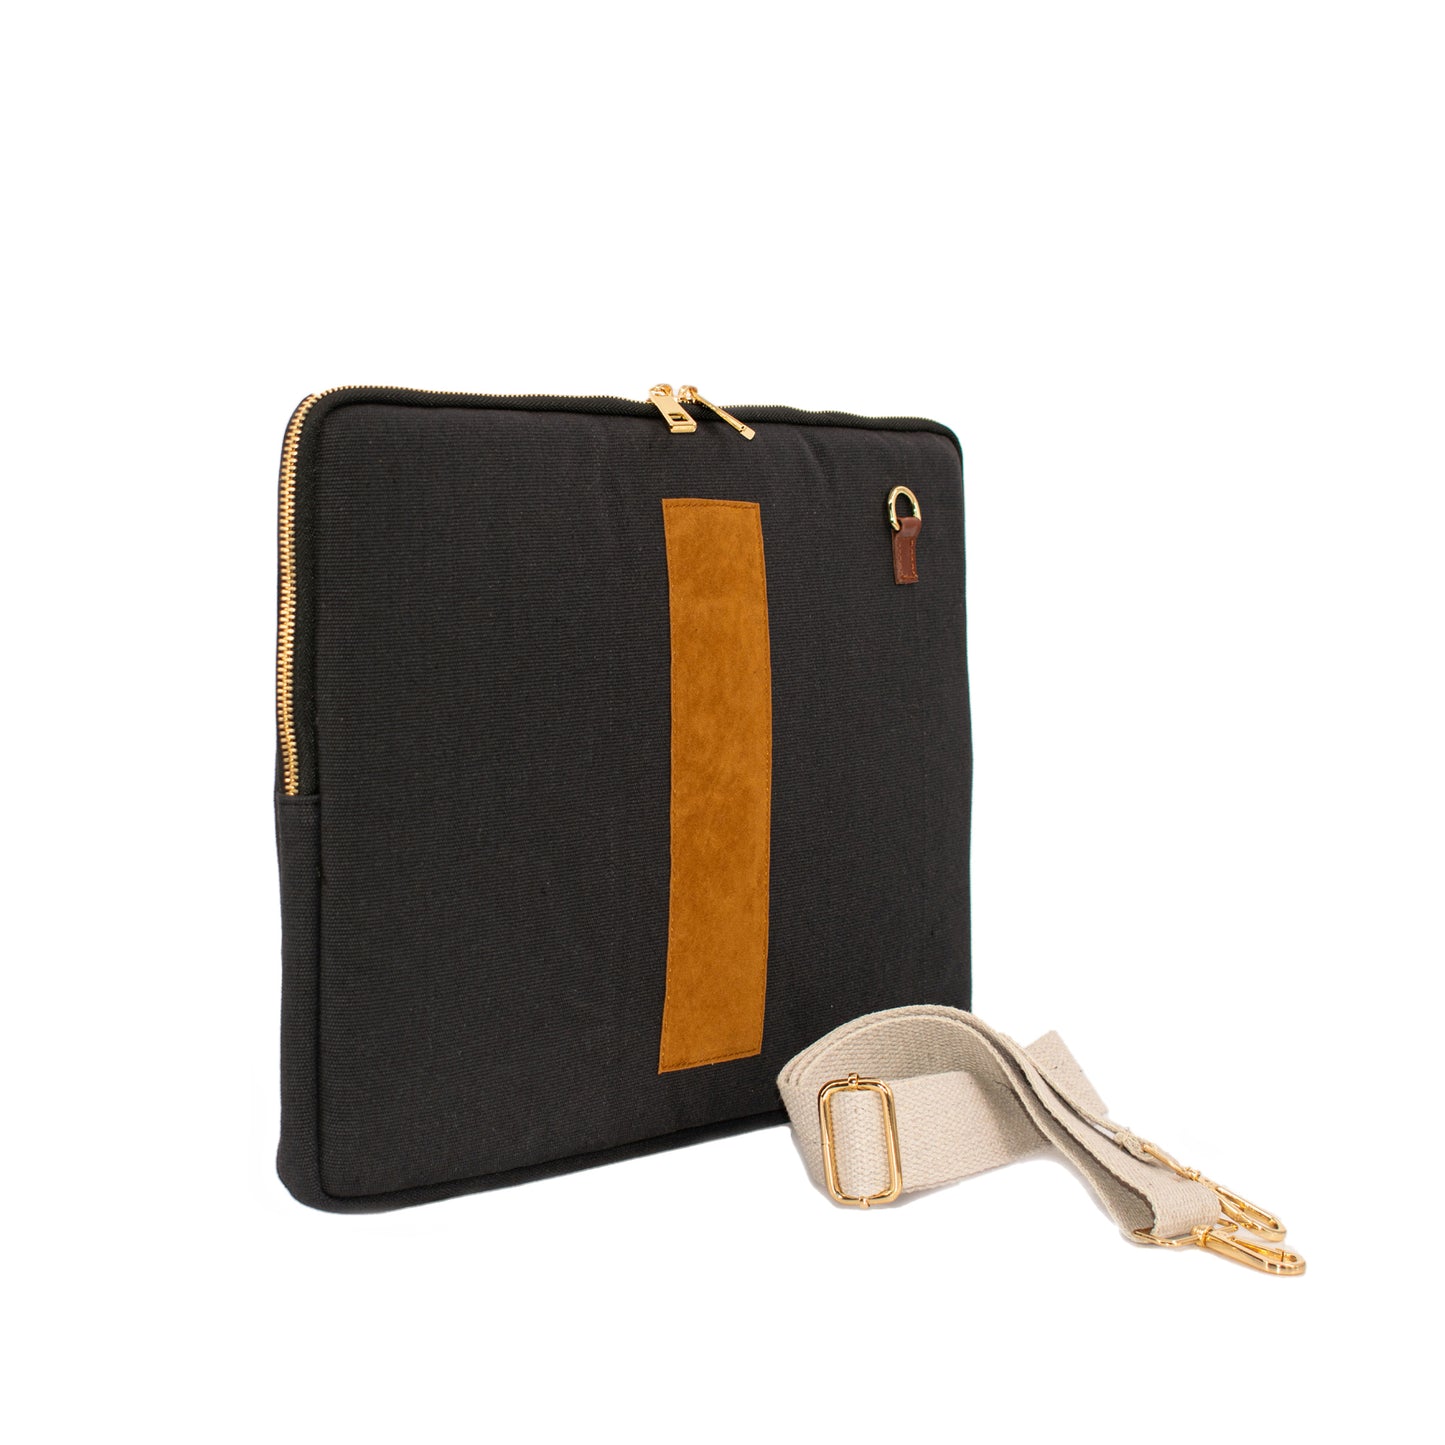 HCANSS ANTHRACITE CANVAS LAPTOP SLEEVE